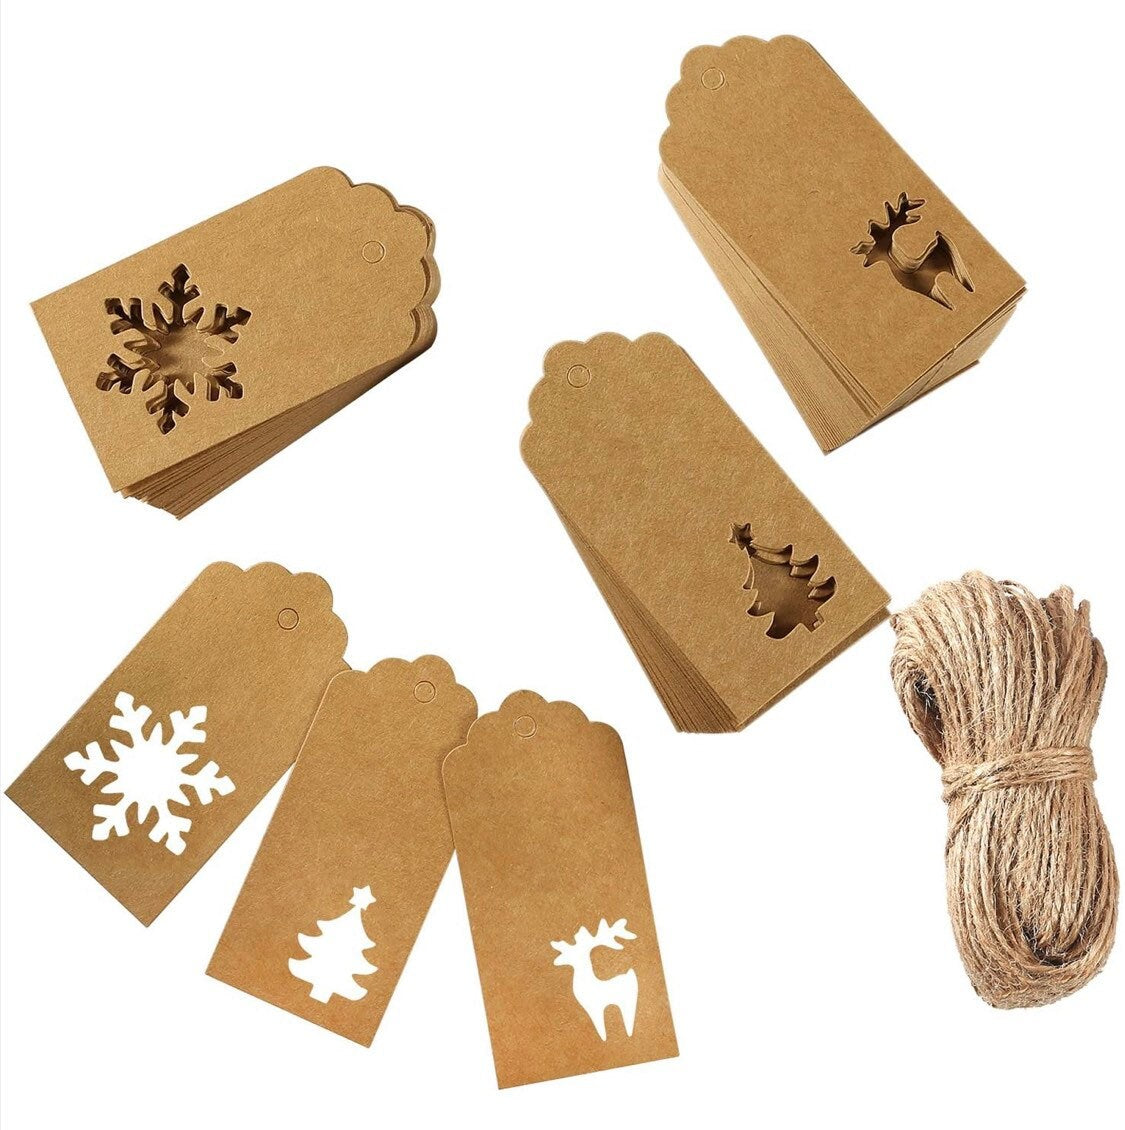 Gift tag set - 25ct Eco friendly sustainable recyclable Kraft paper Christmas gift tags - present tags with holiday winter themes